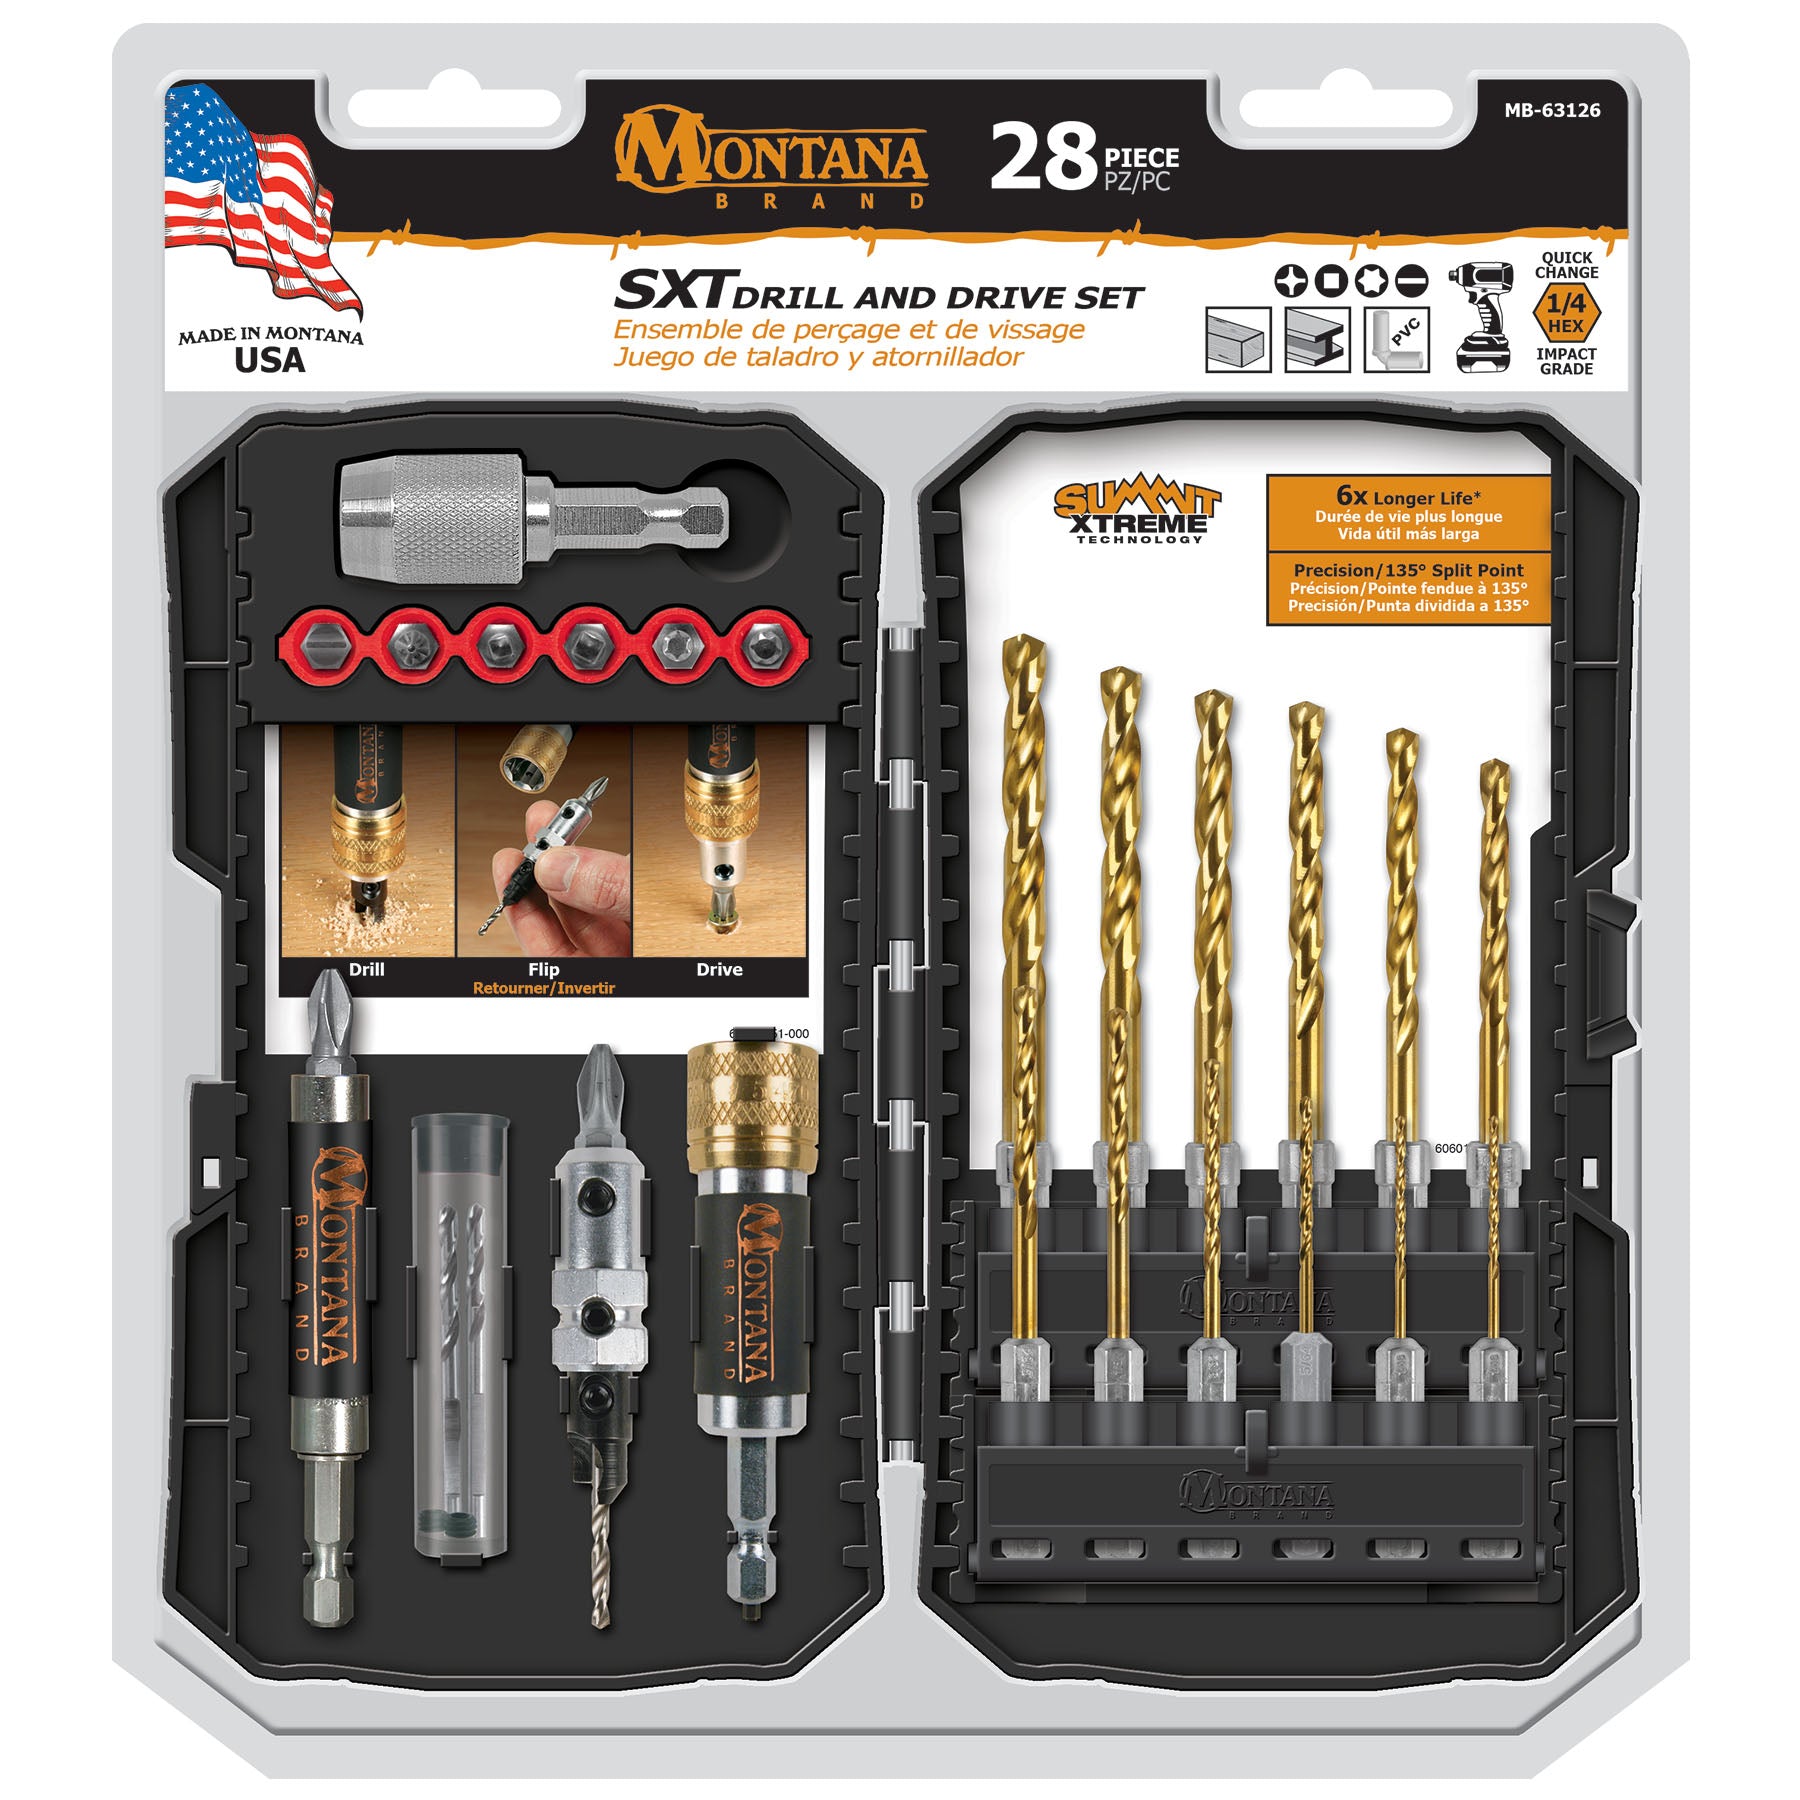 28pc Drill and Drive Set